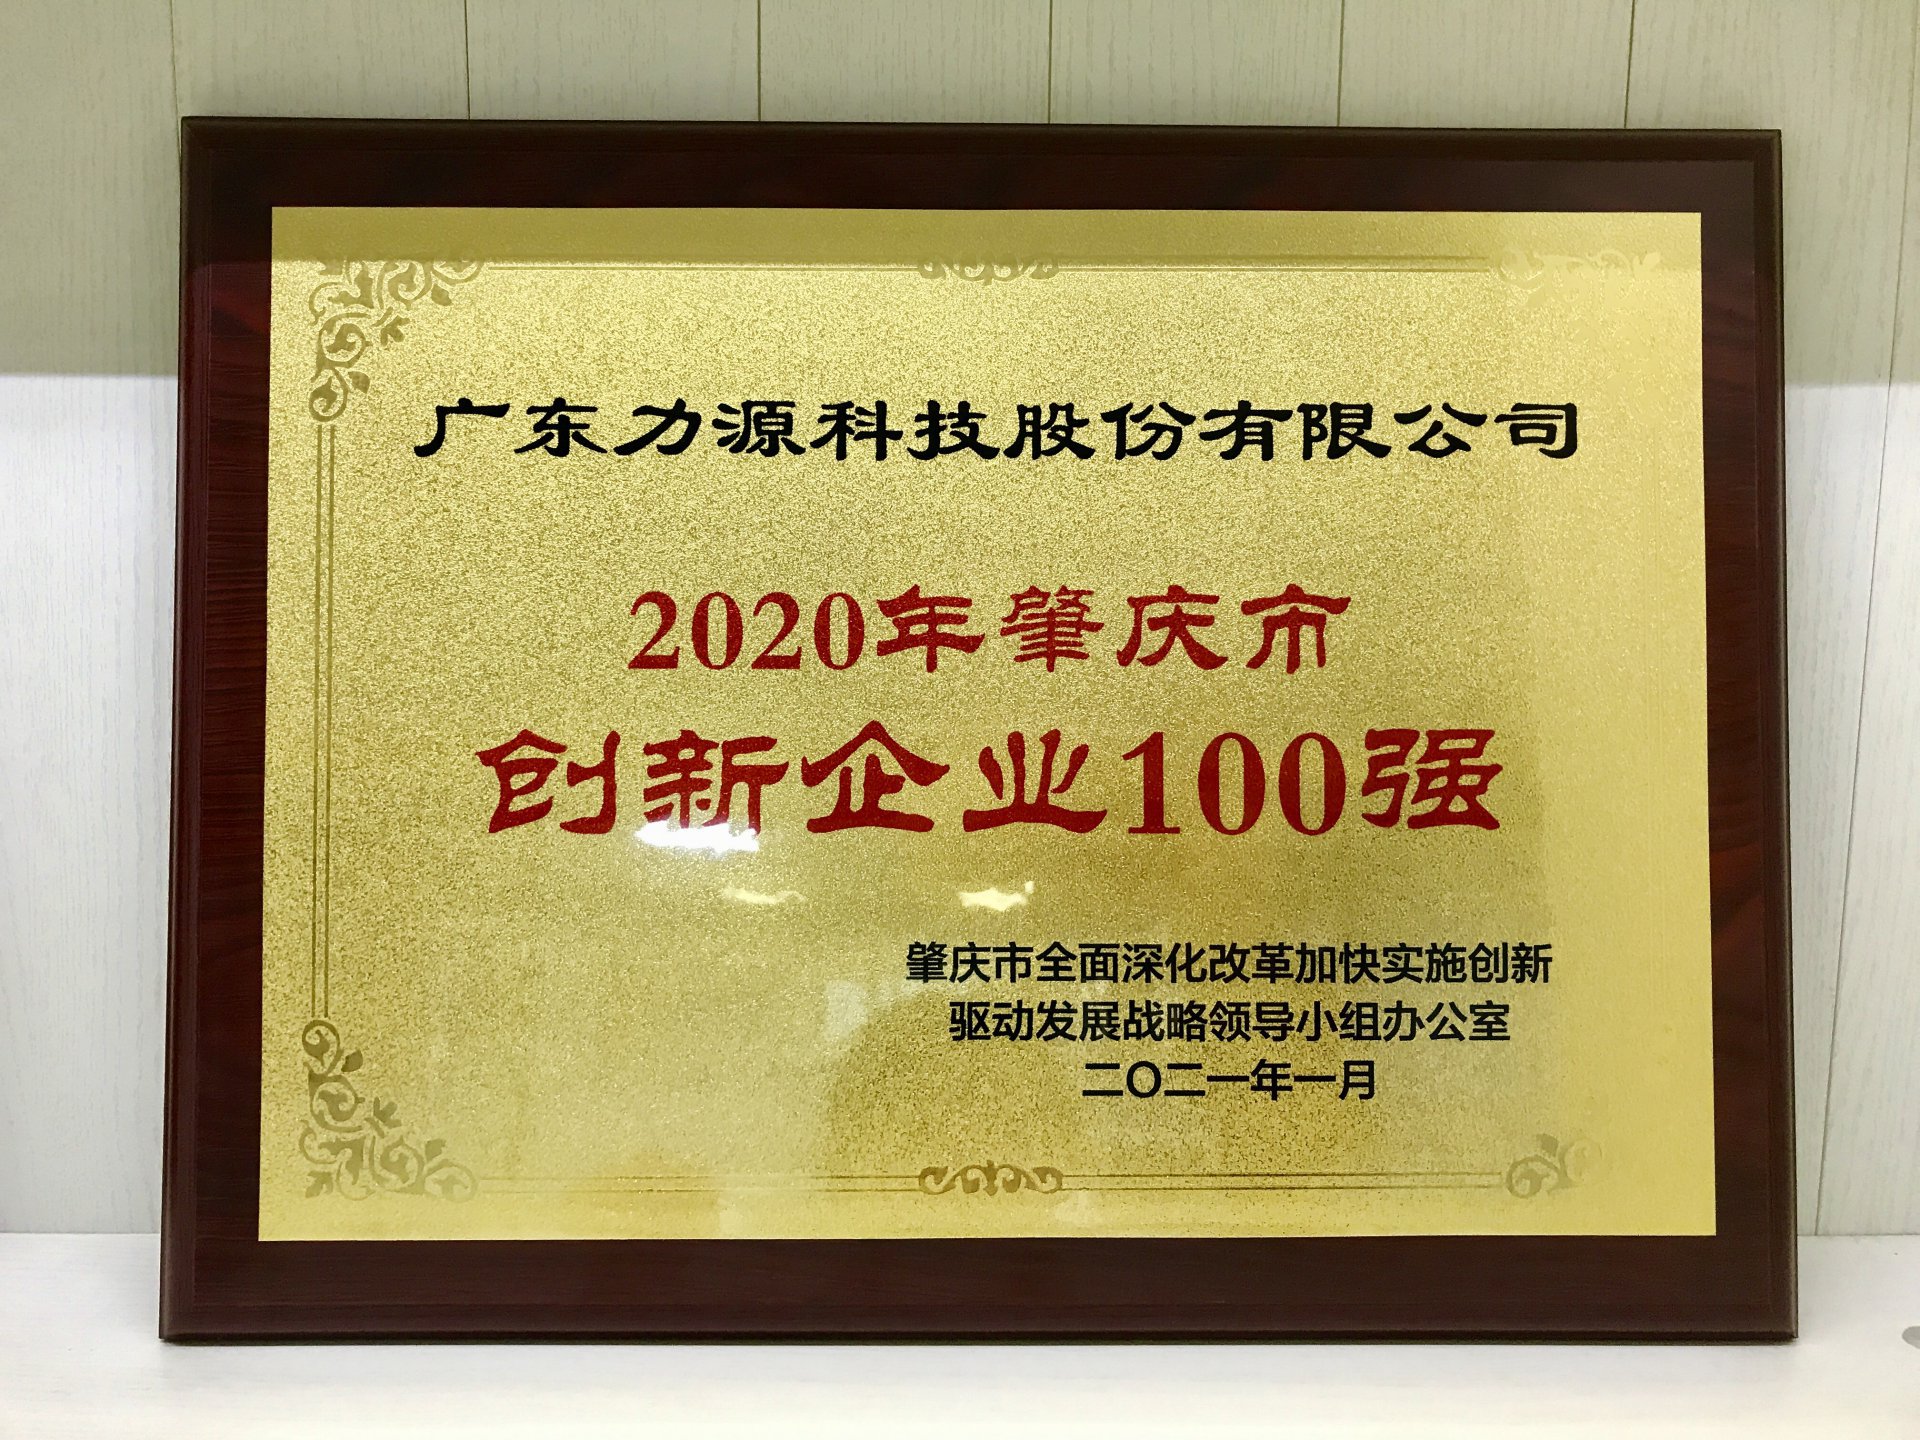 Liyuan technology won the title of "top 100 innovative enterprises in Zhaoqing City" in 2020